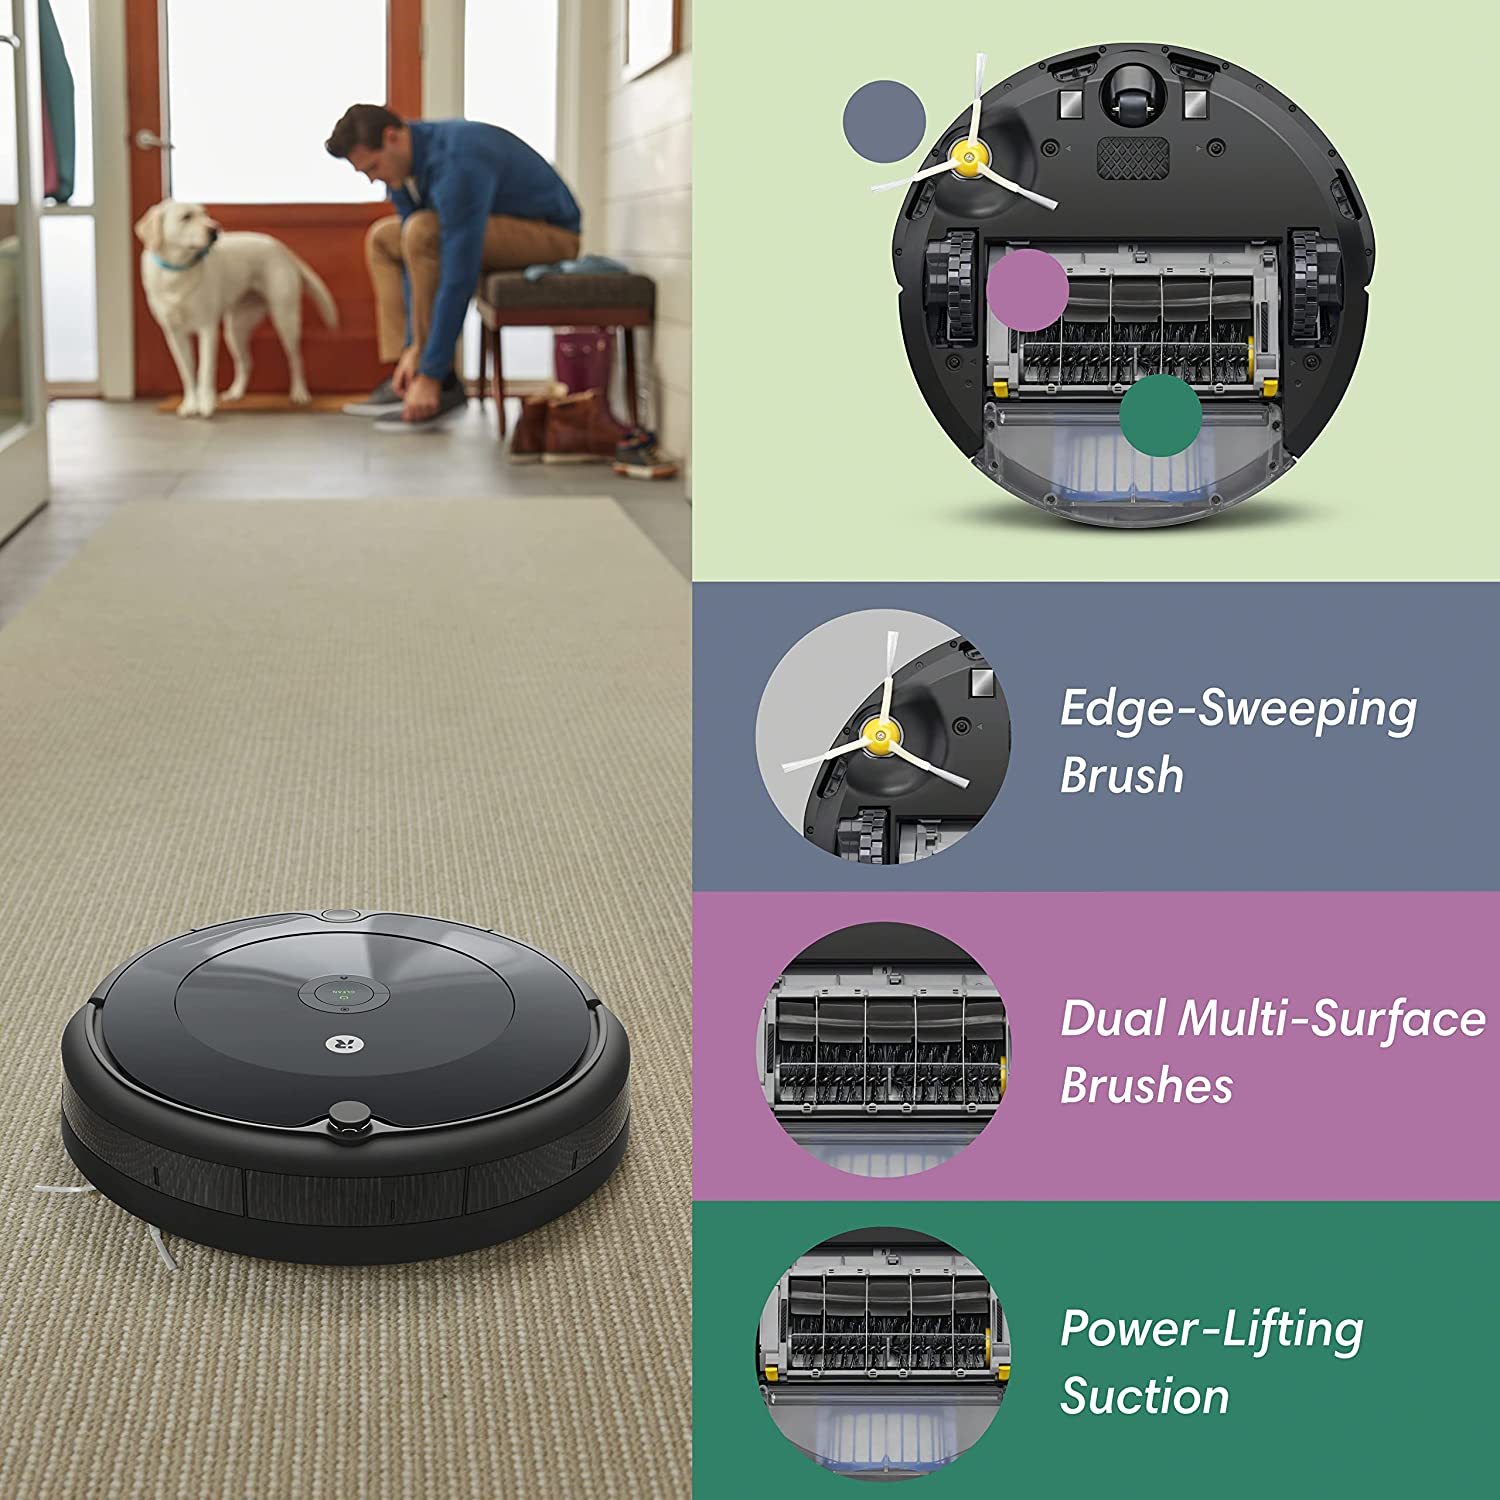 2-Pack iRobot Roomba 692 Robot Vacuum- Charcoal Grey With 2 Screen Cleaners